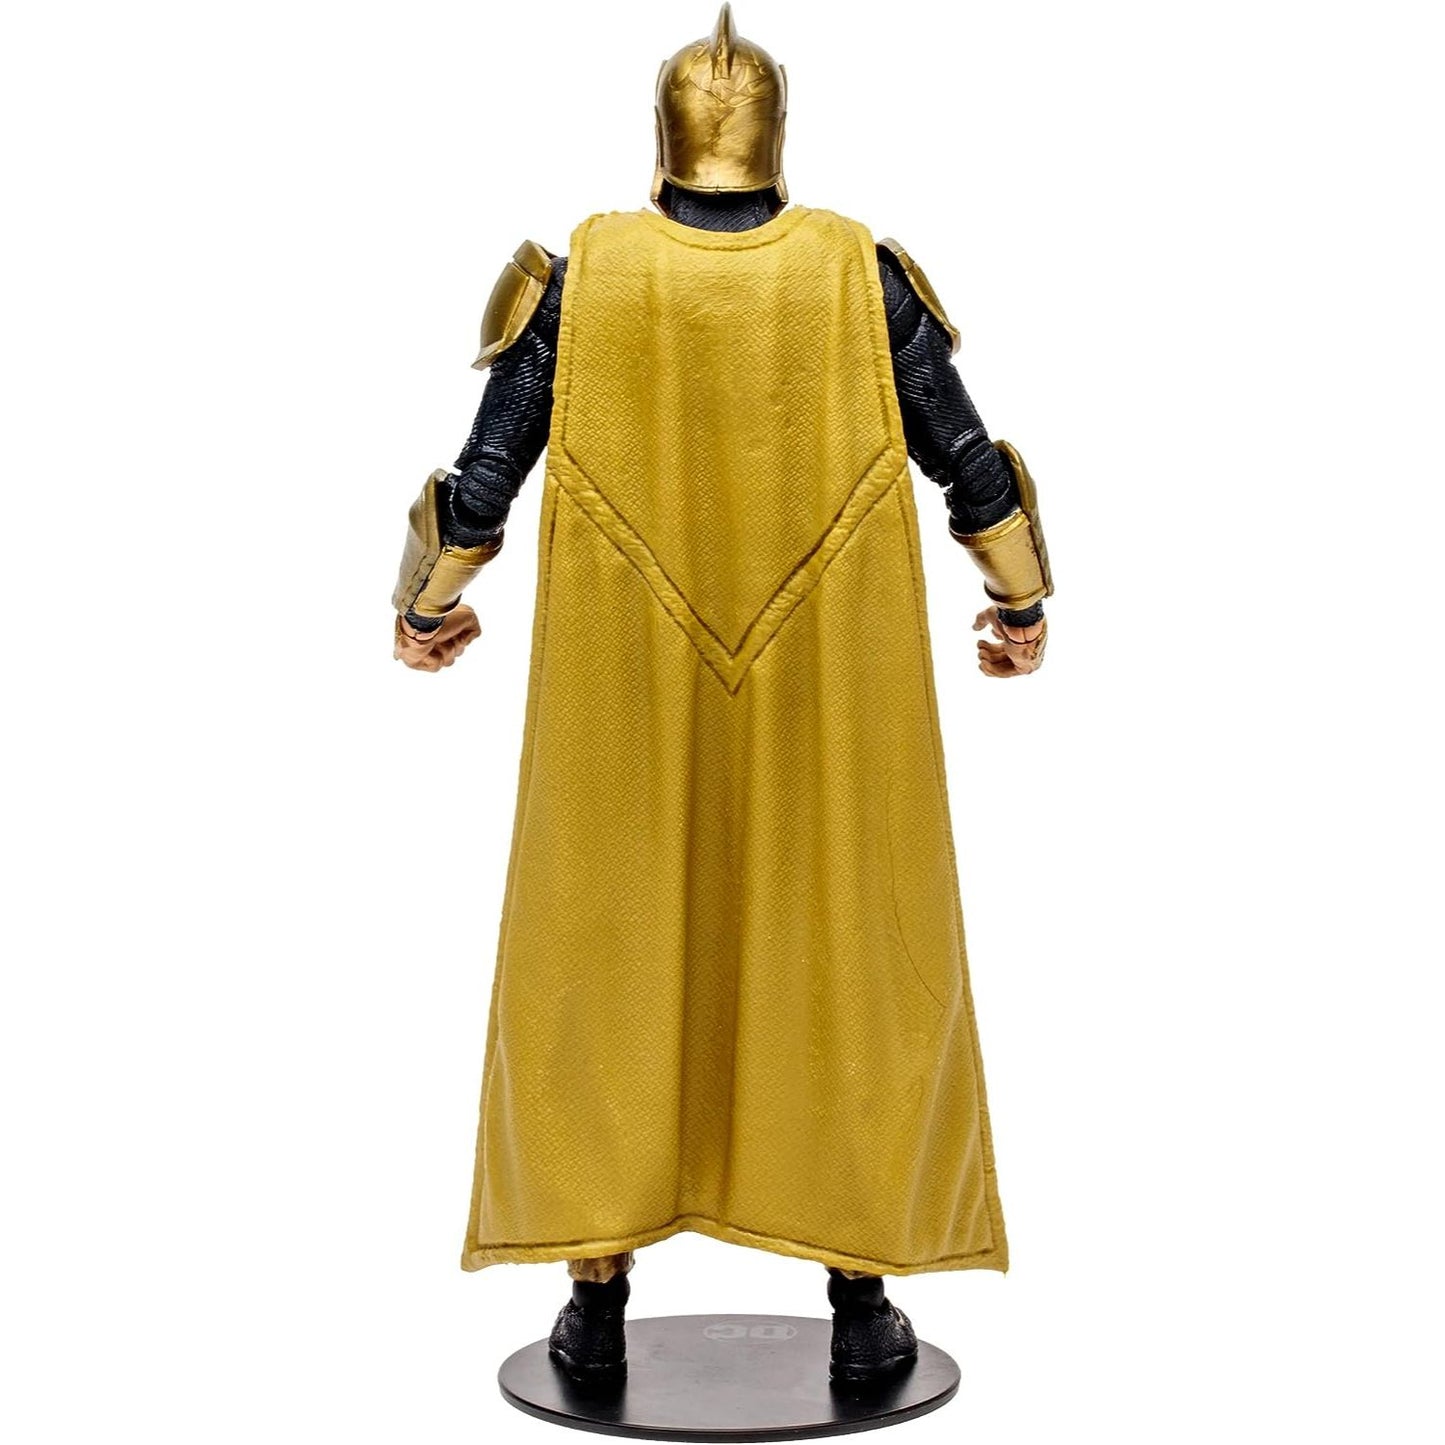 Injustice 2 - DR. Fate Action Figure Toy back view - Heretoserveyou